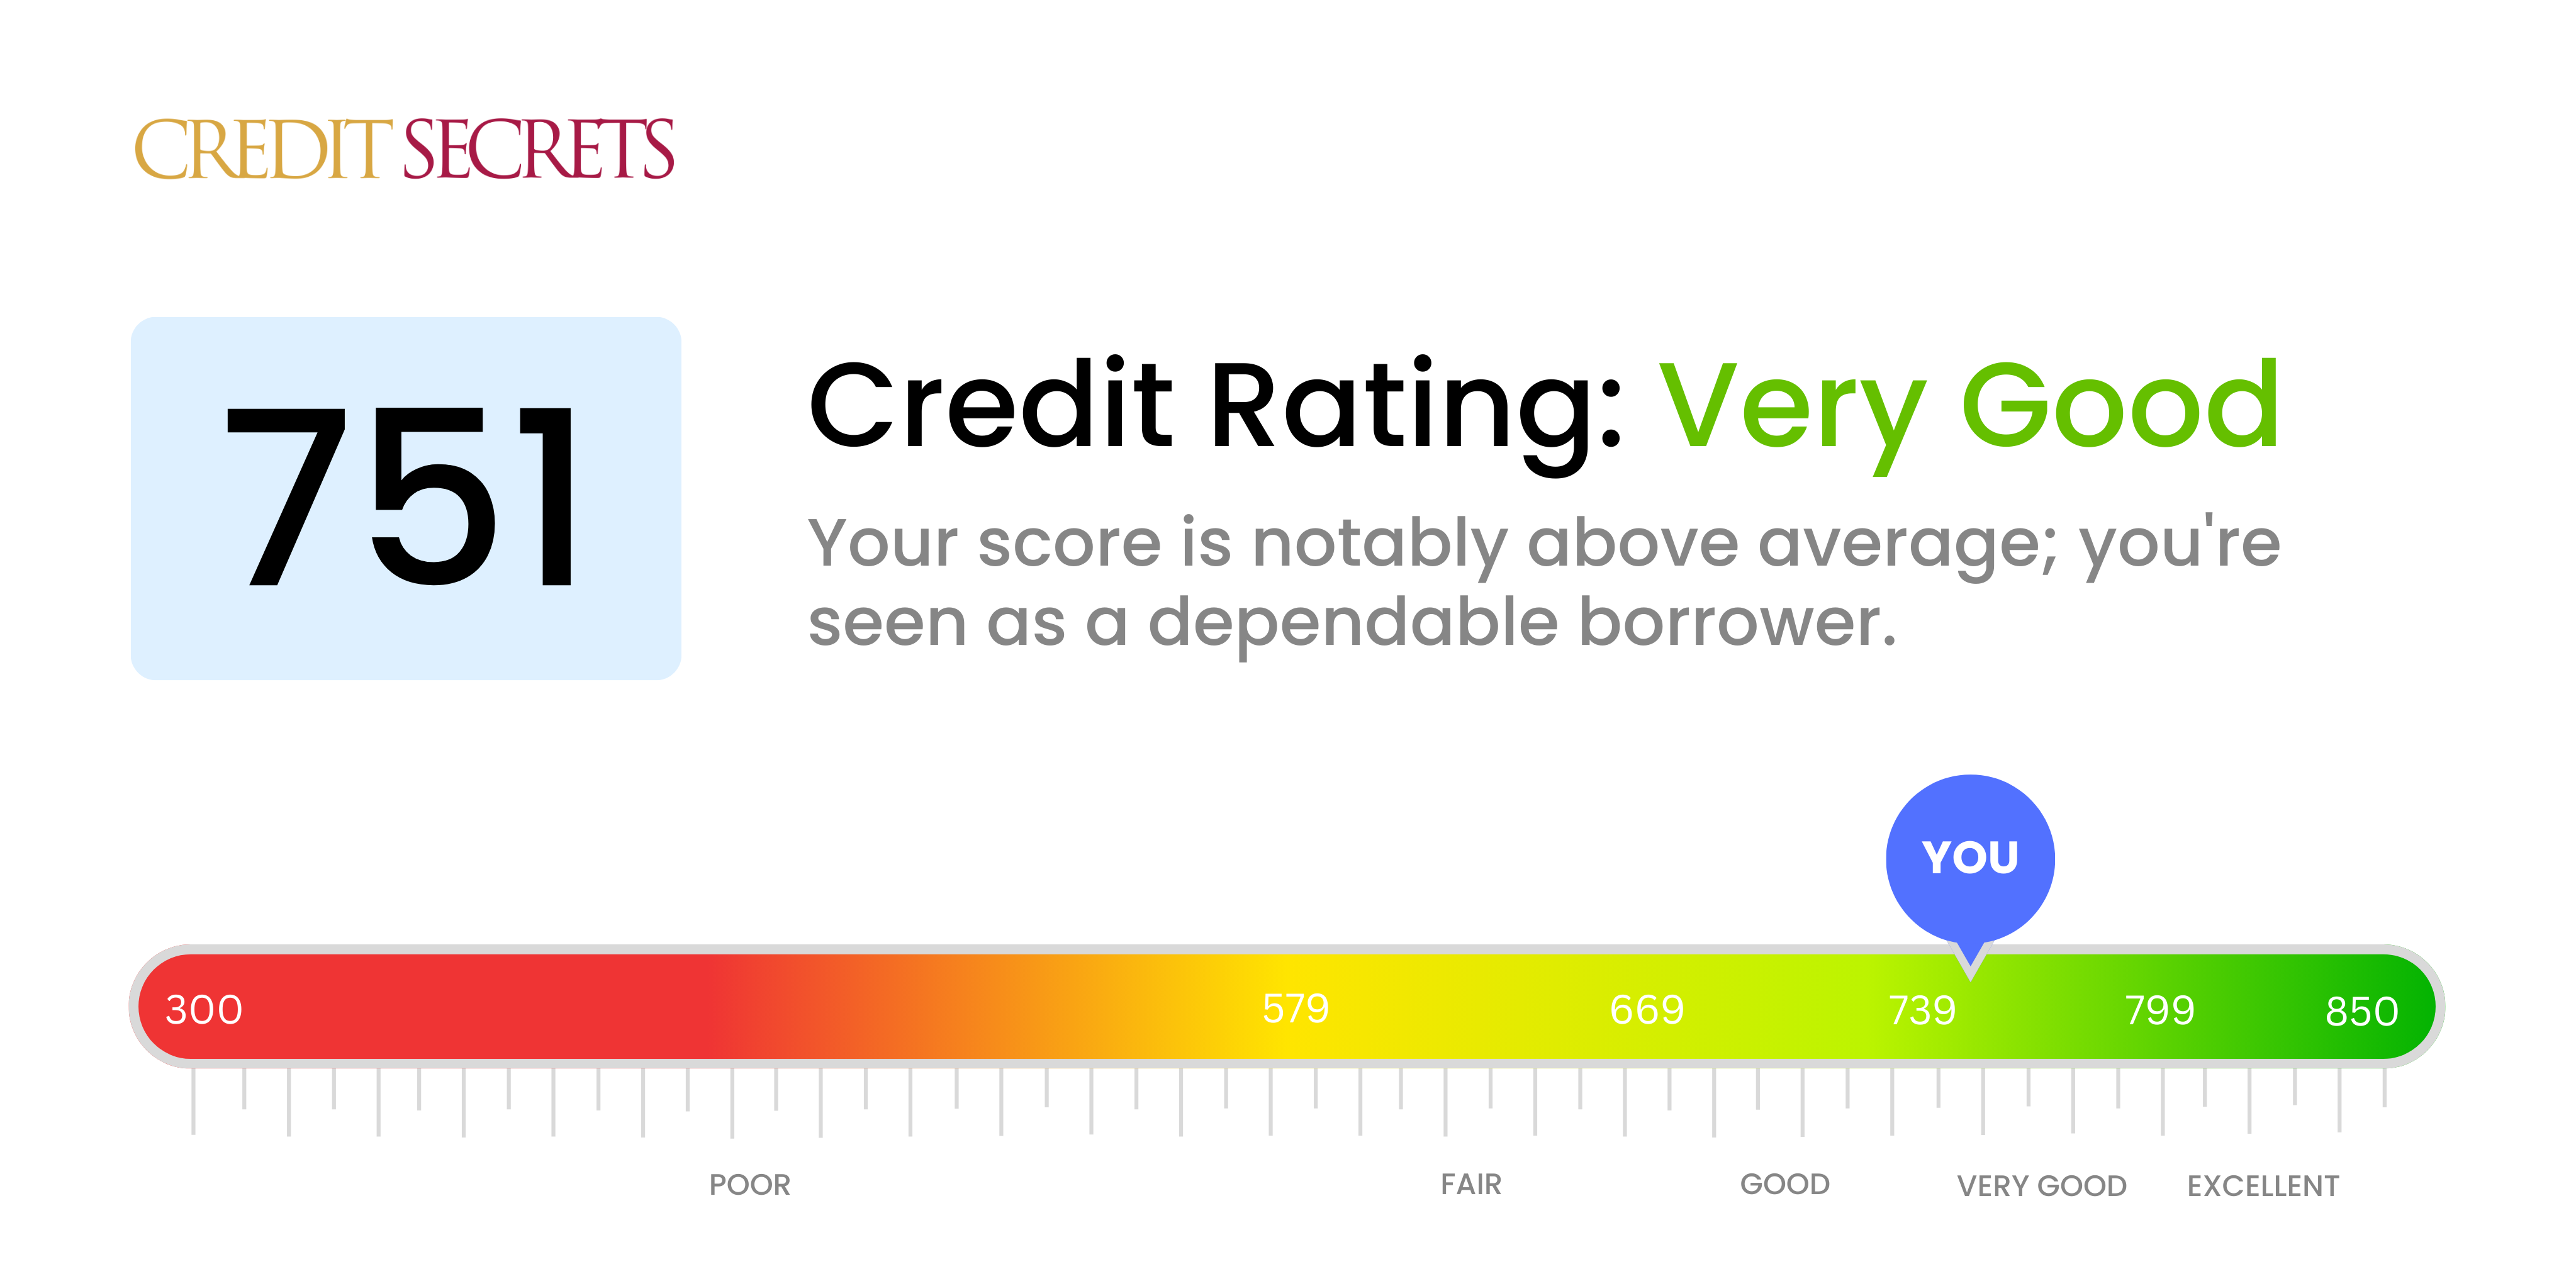 Is 751 a good credit score?